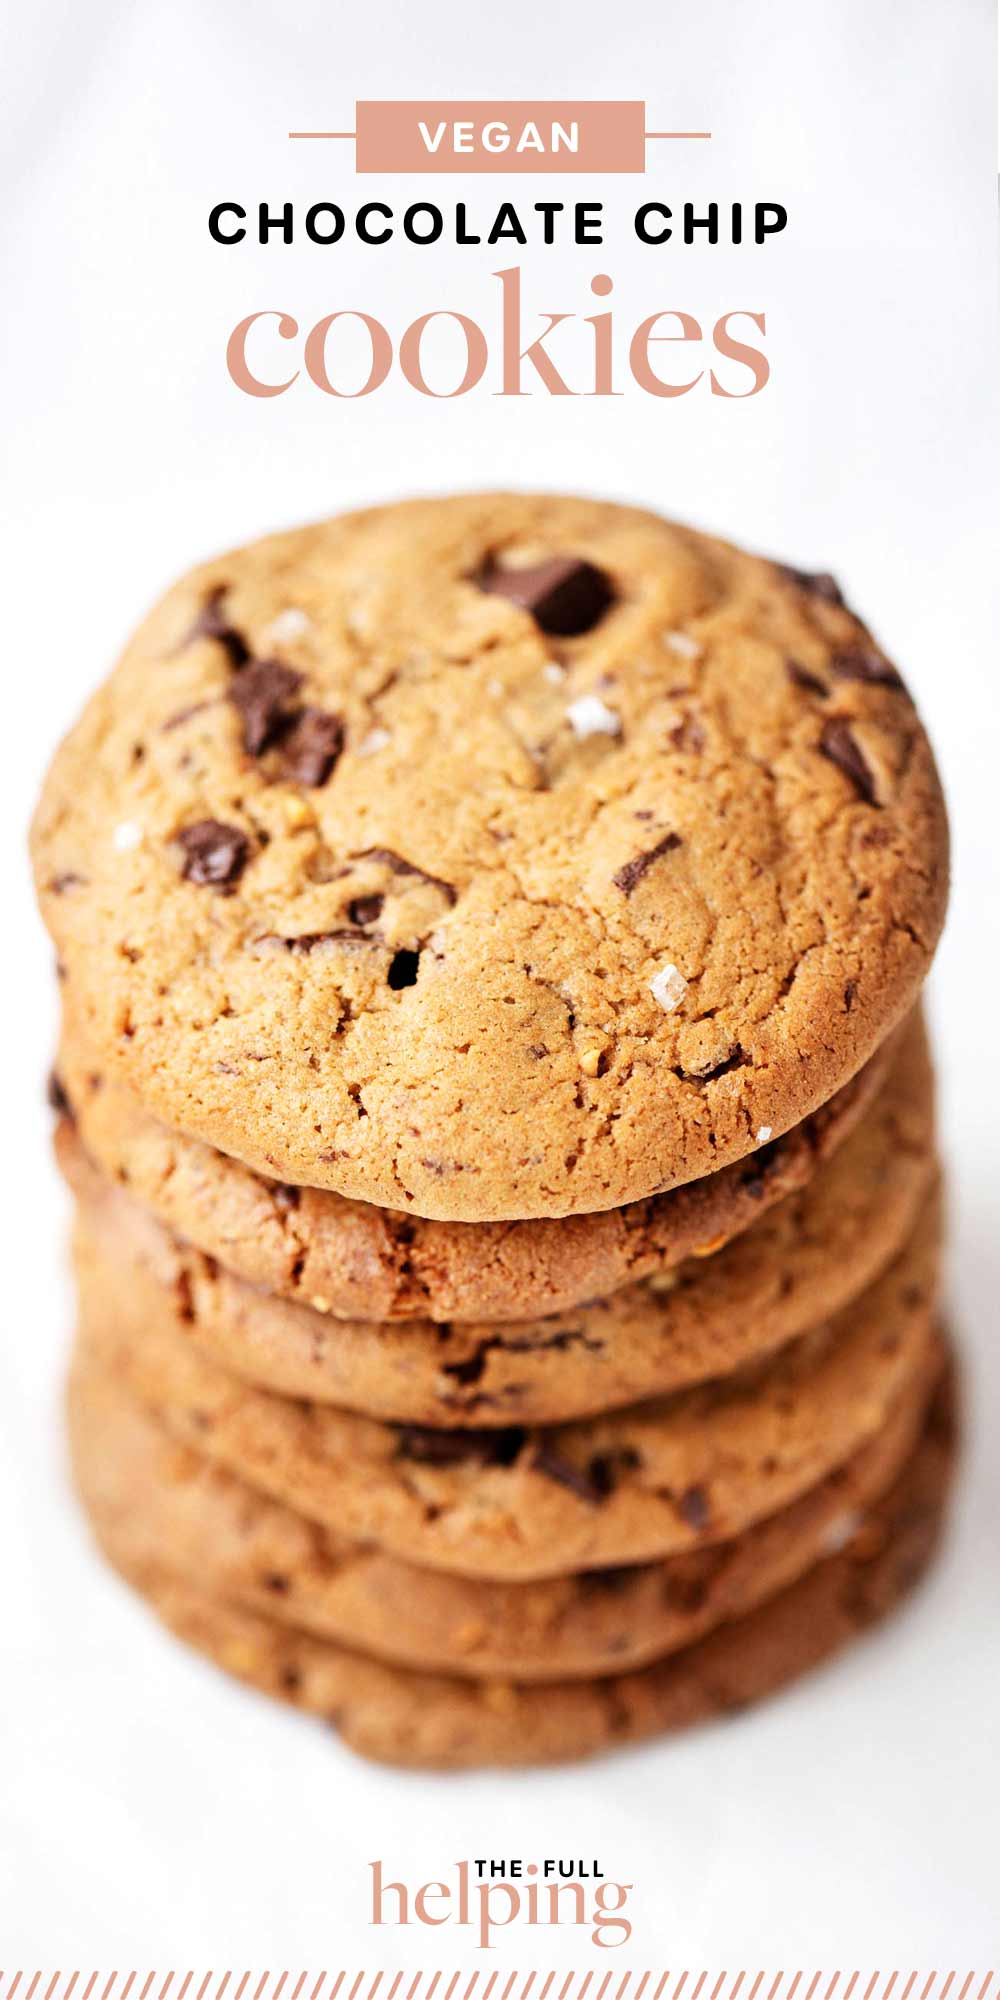 America's Test Kitchen Vegan Chocolate Chip Cookies | The Full Helping